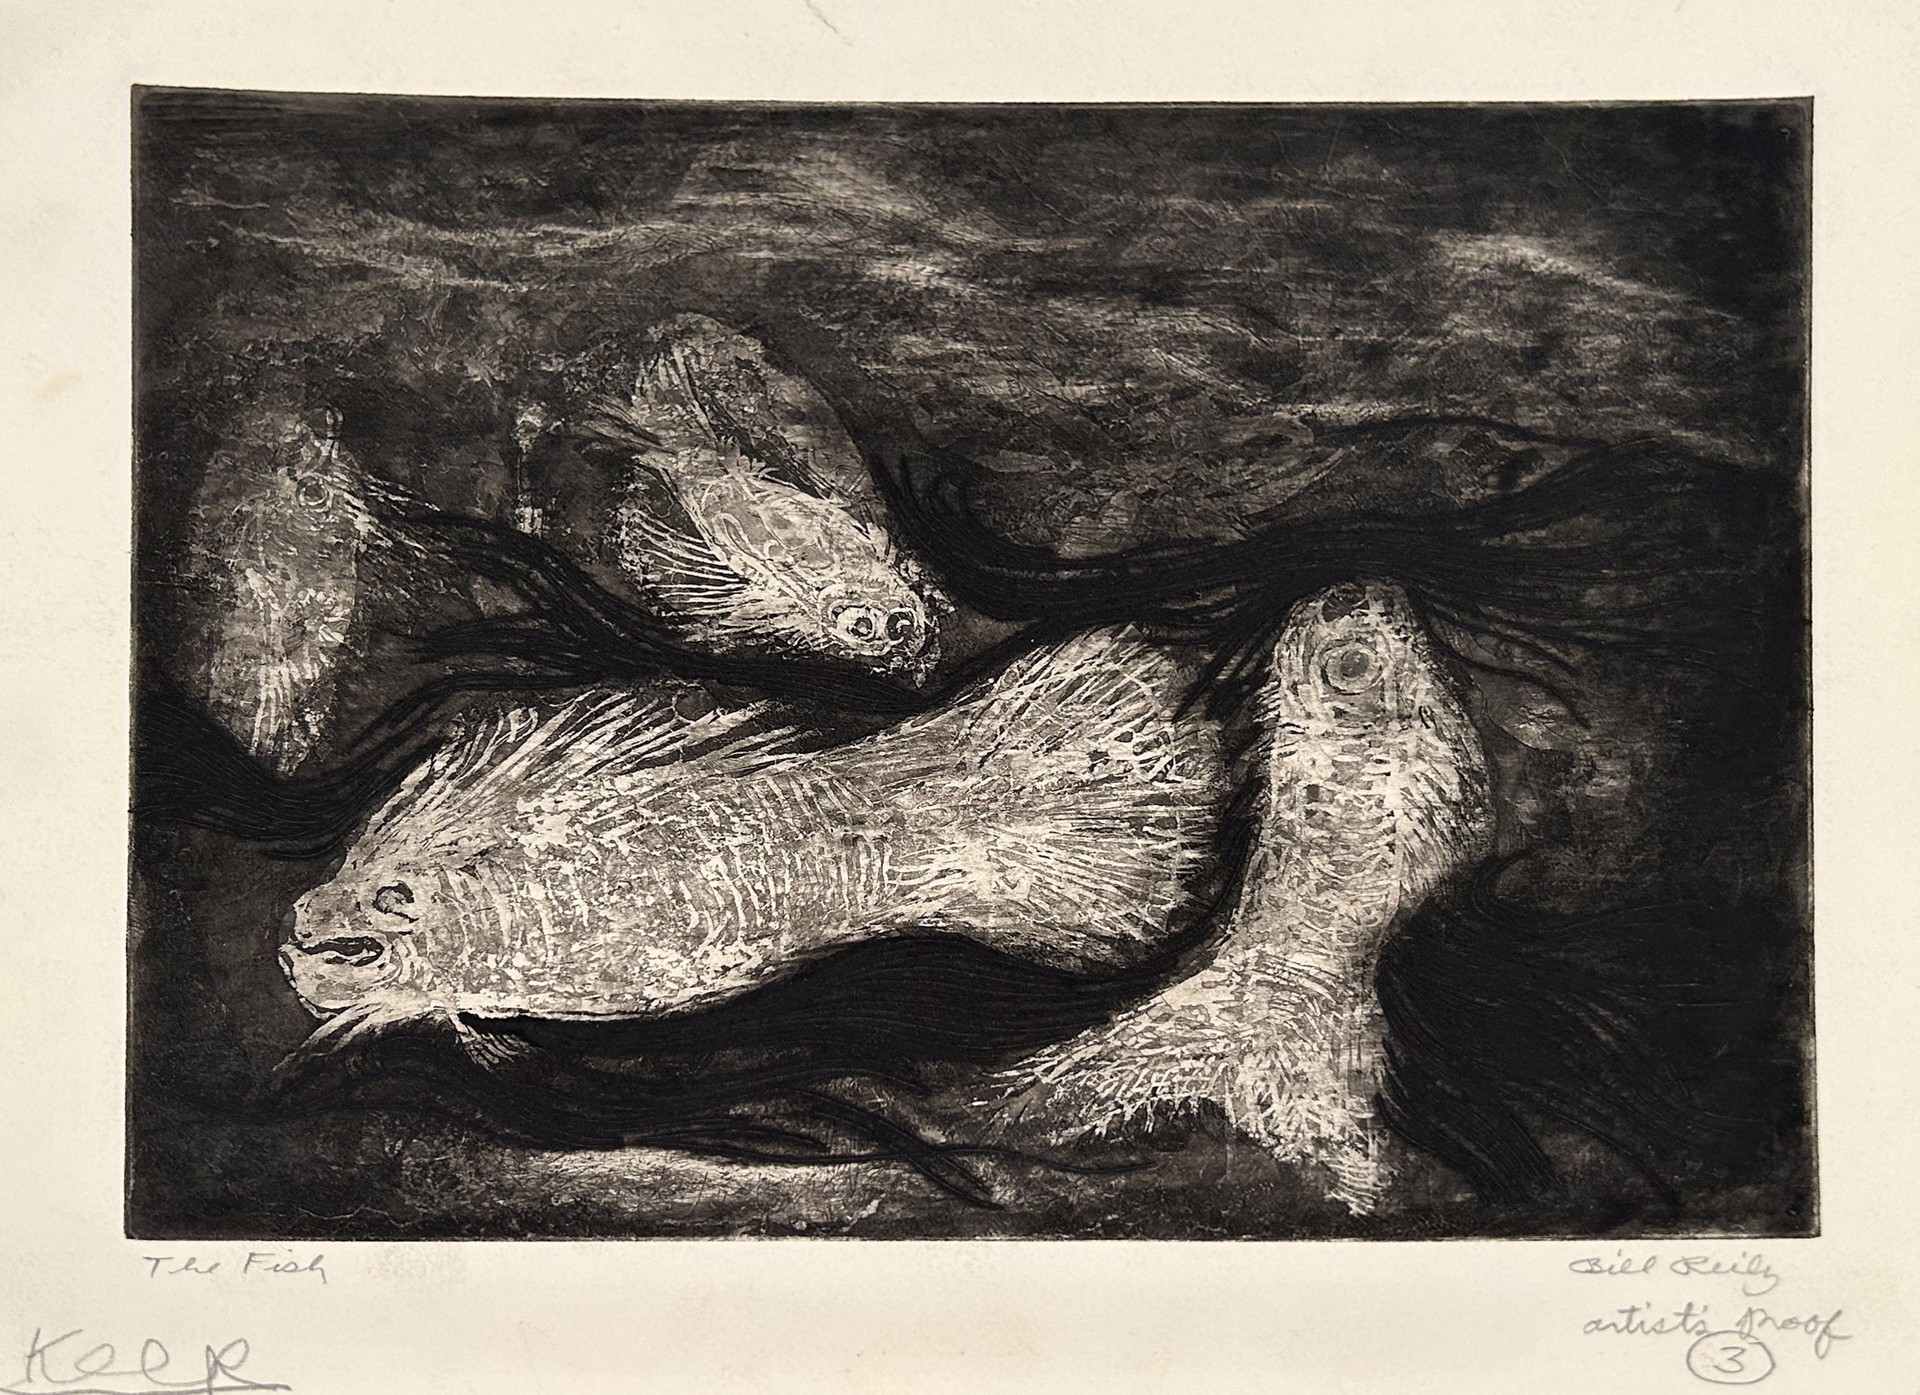 3. The Fish (Artist Proof) by Bill Reily Prints